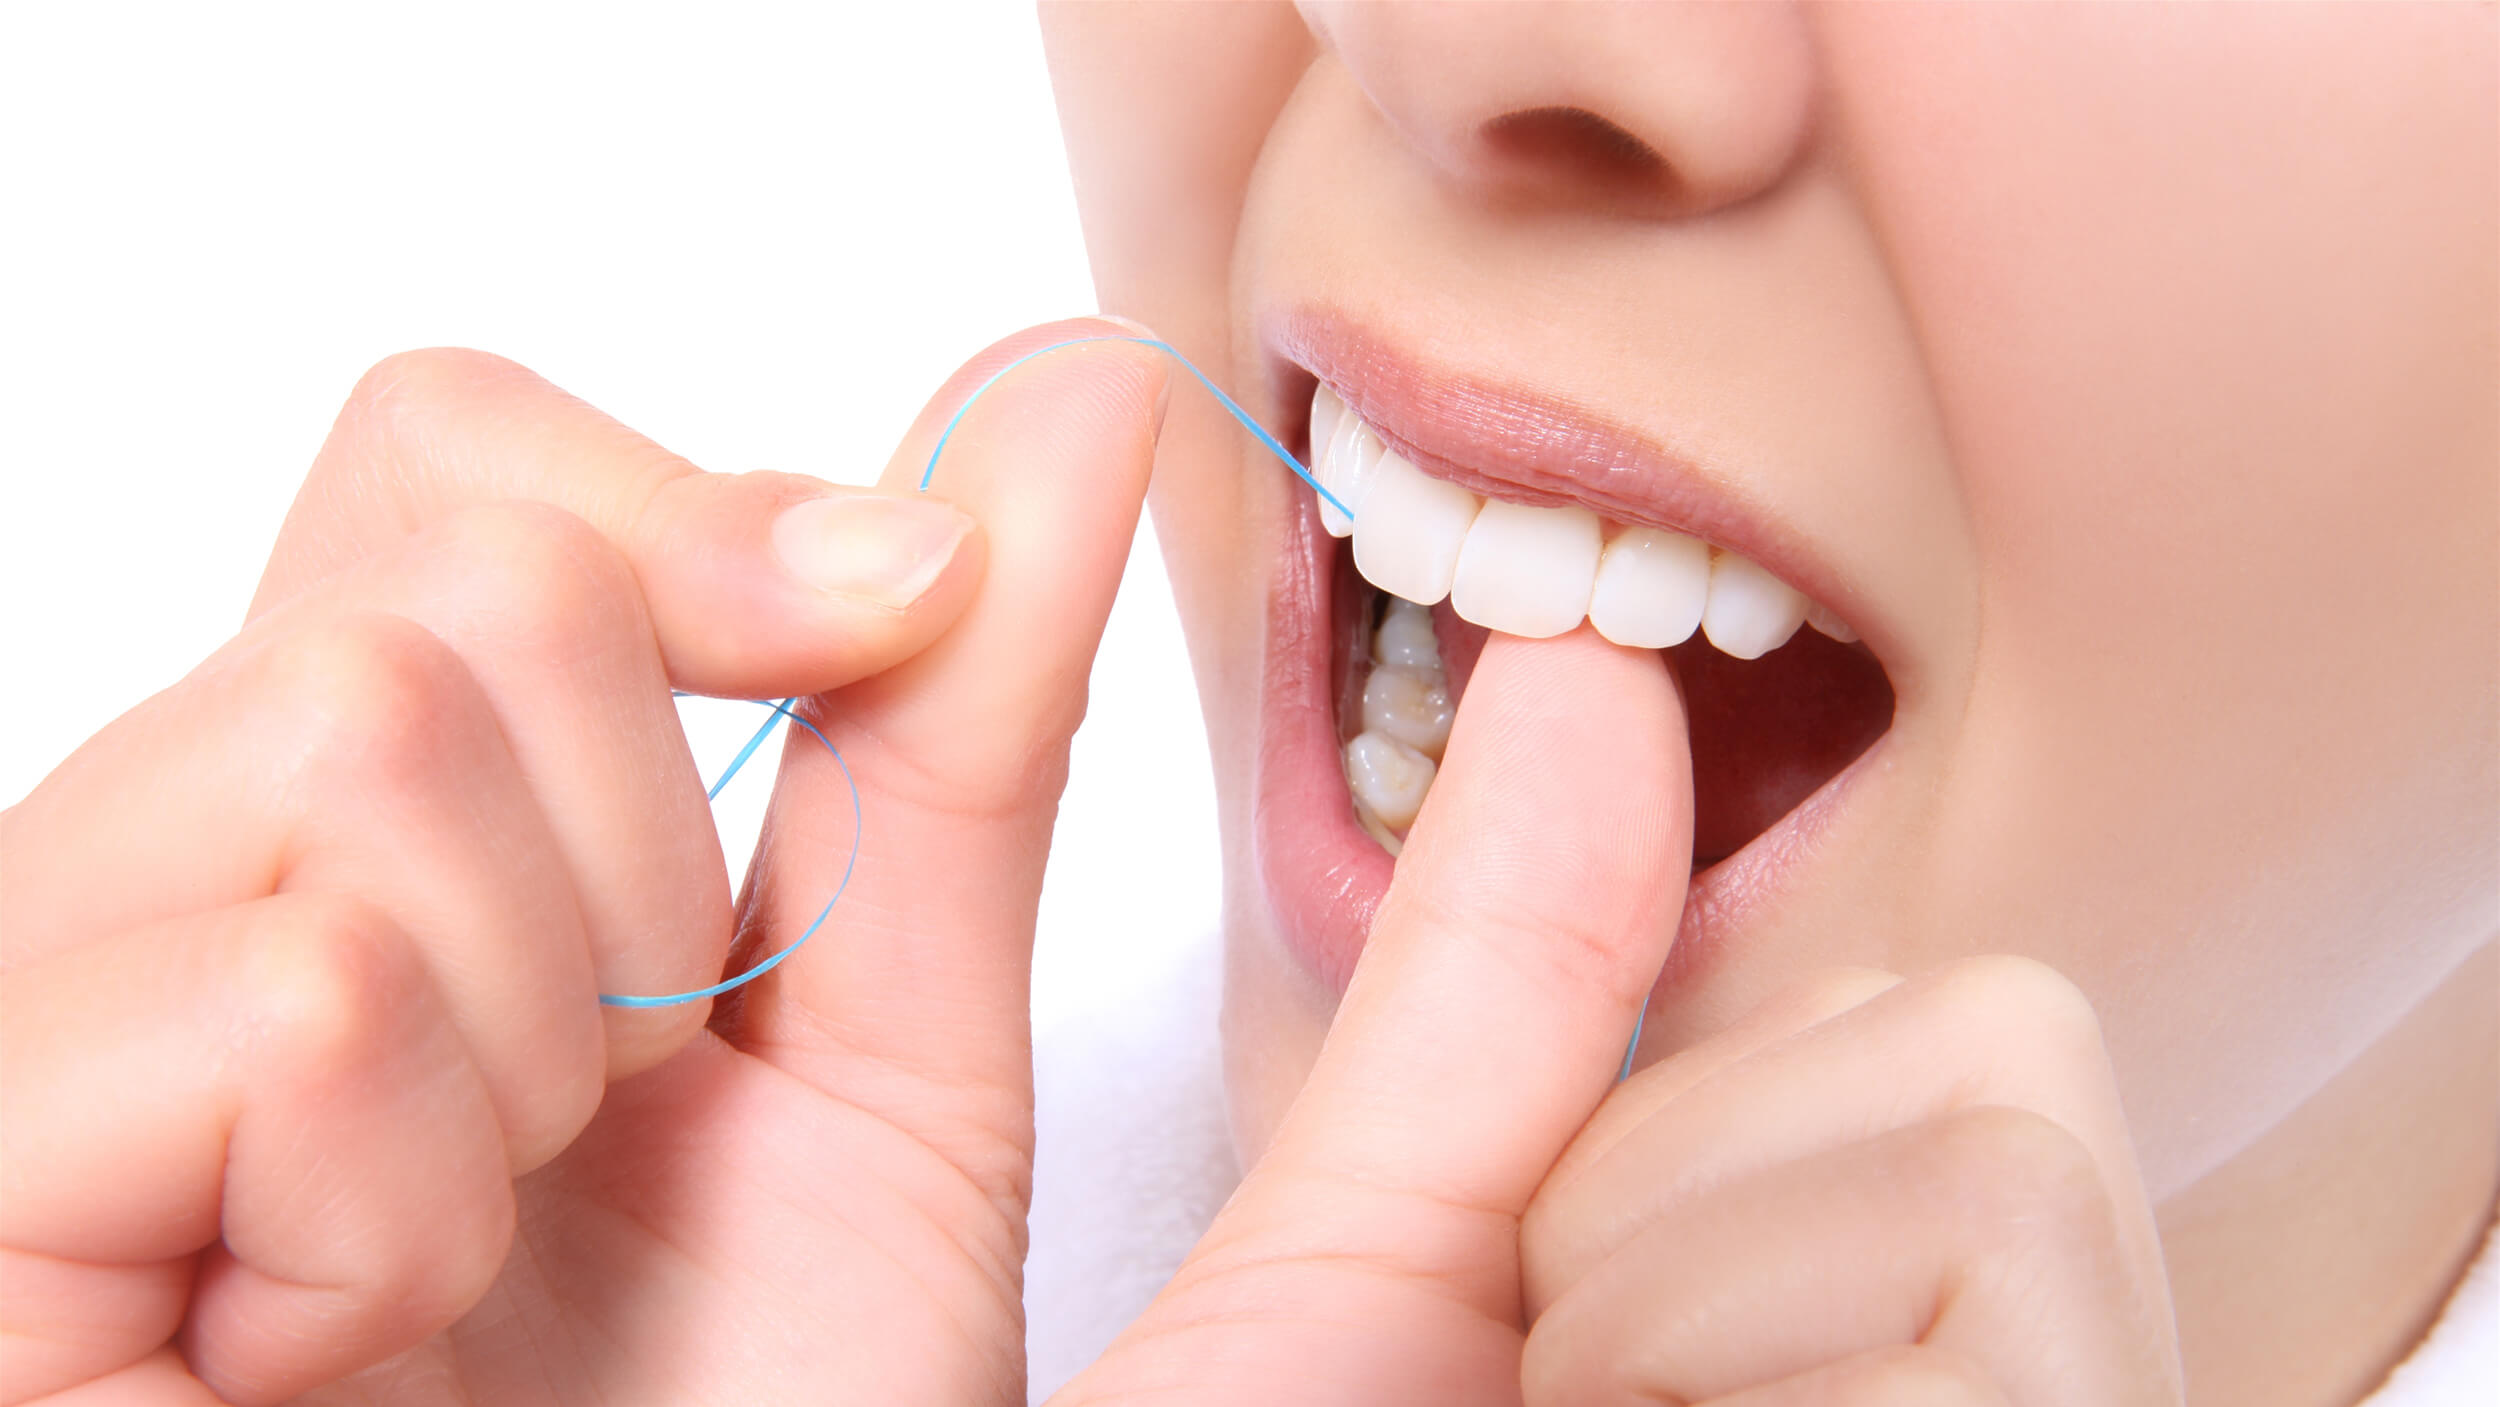 A close-up of a woman flossing her teeth